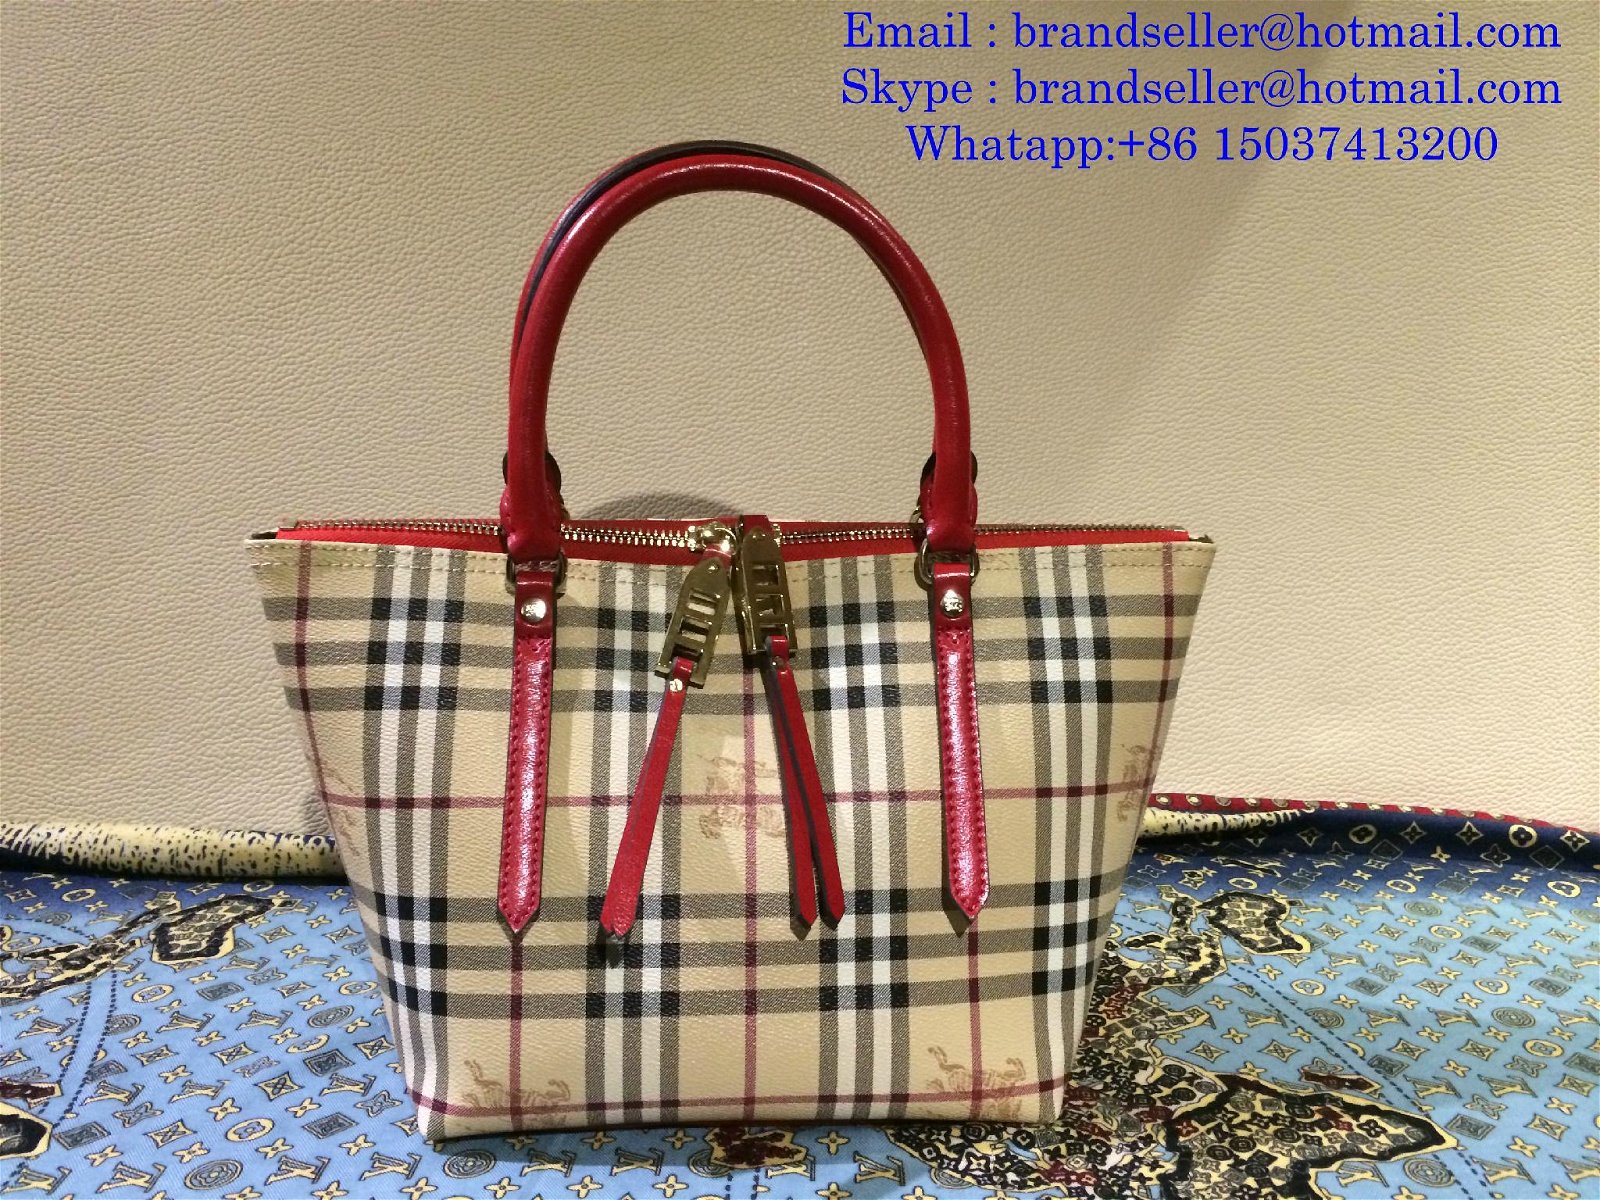 Are Any Burberry Bags Made In China | City of Kenmore, Washington